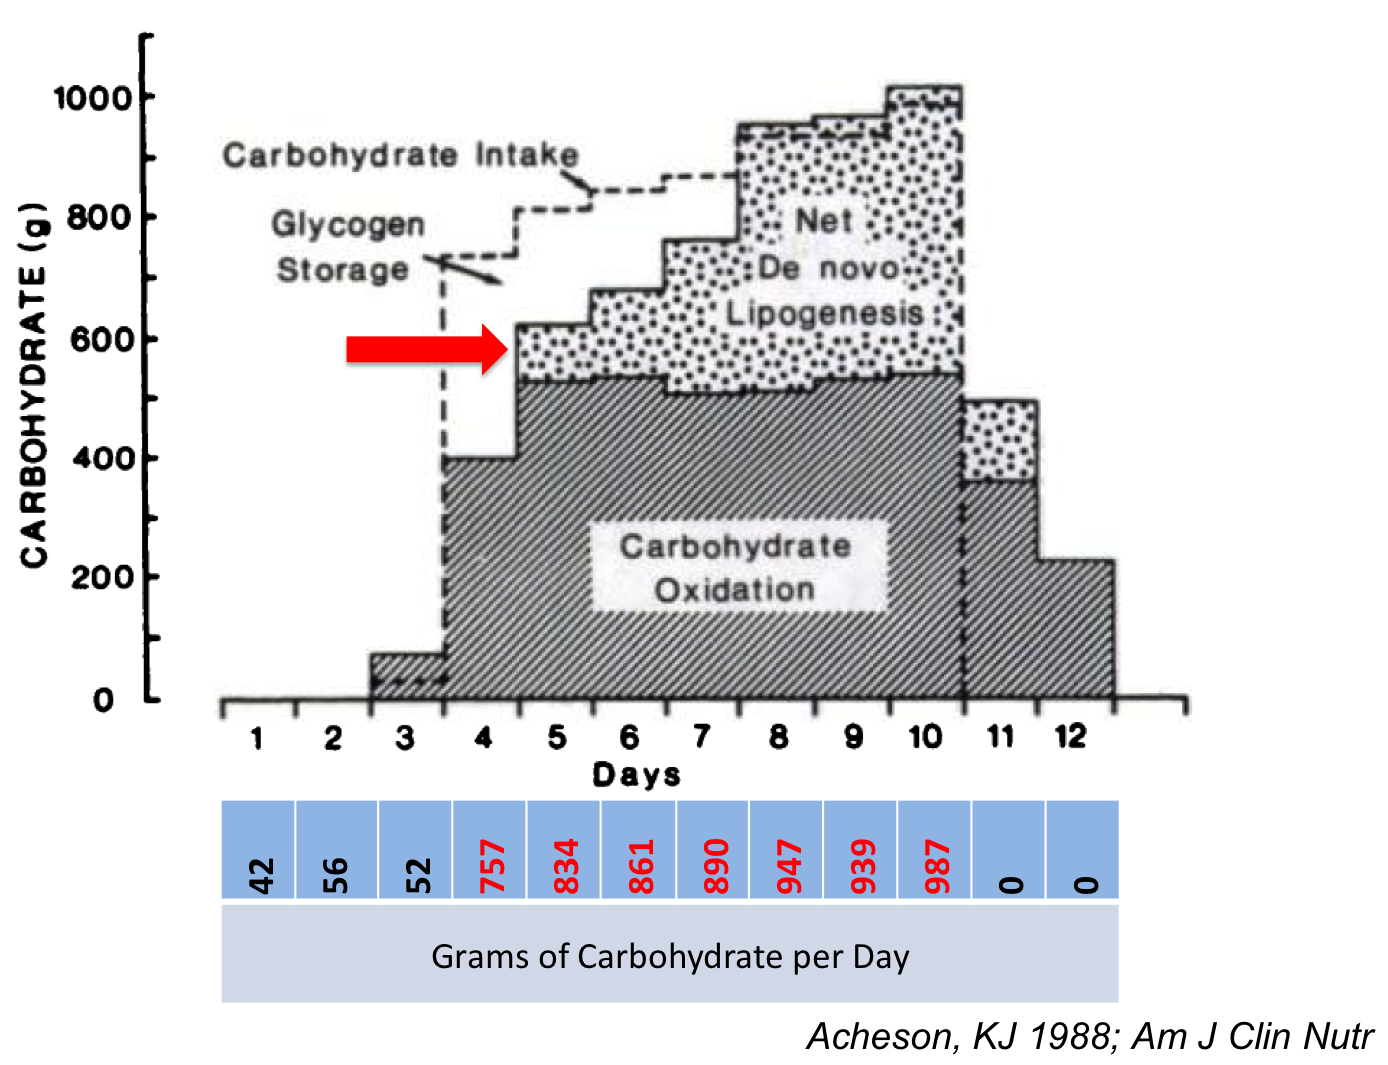 The effect of eating massive amounts of carbohydrate on fat (lipogenesis) and carbohydrate/glycogen storage